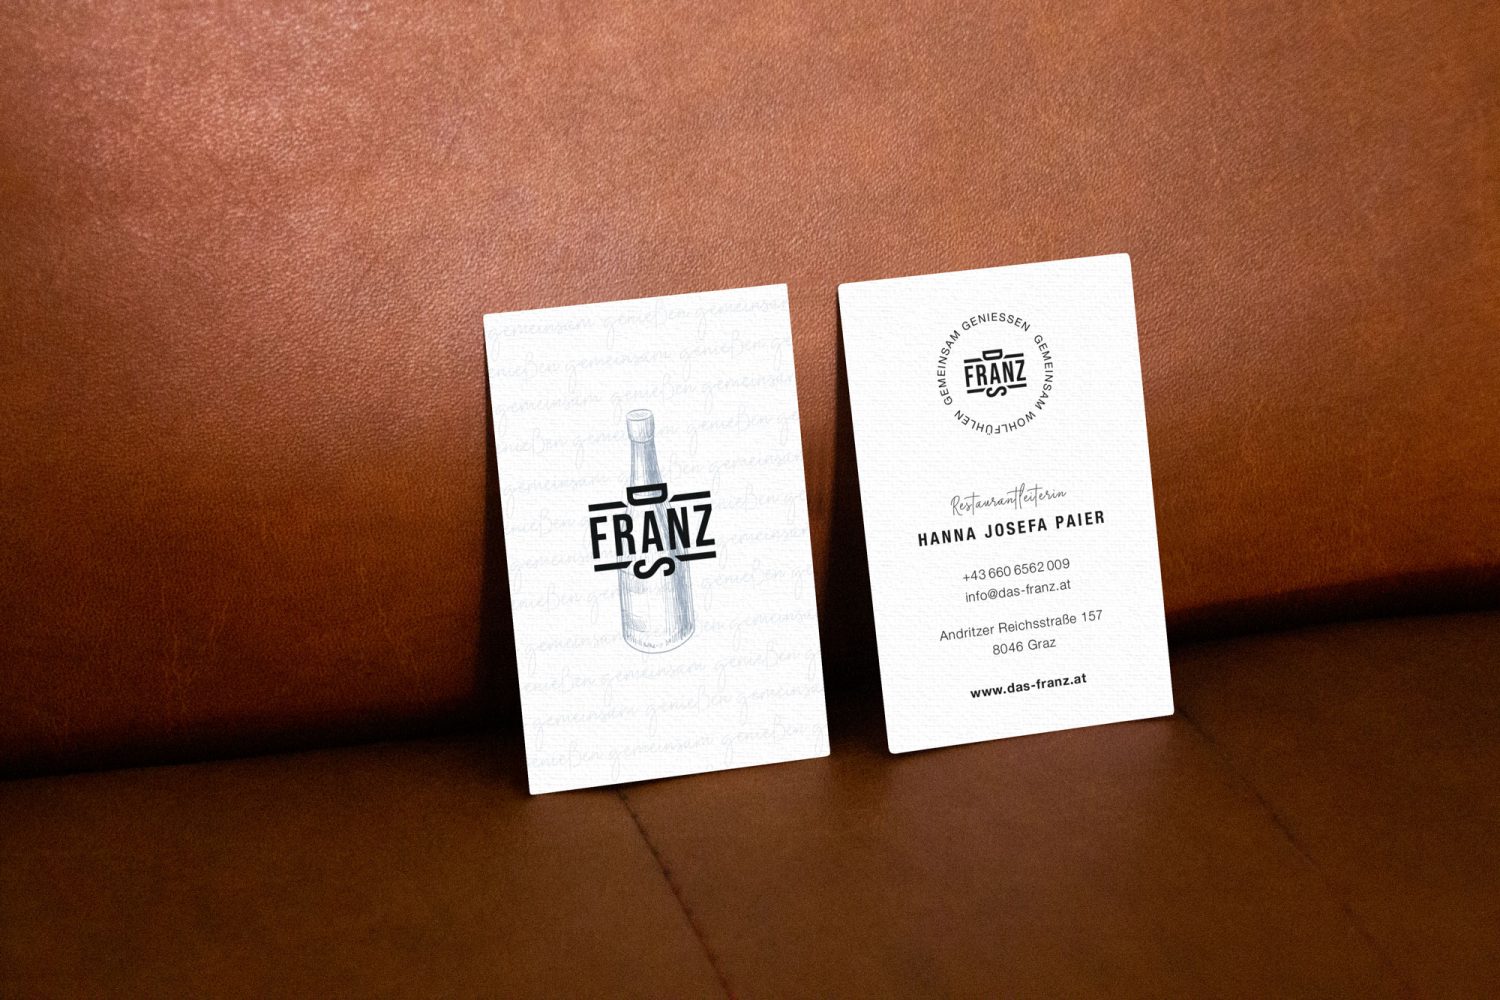 Two business cards on a leather couch.